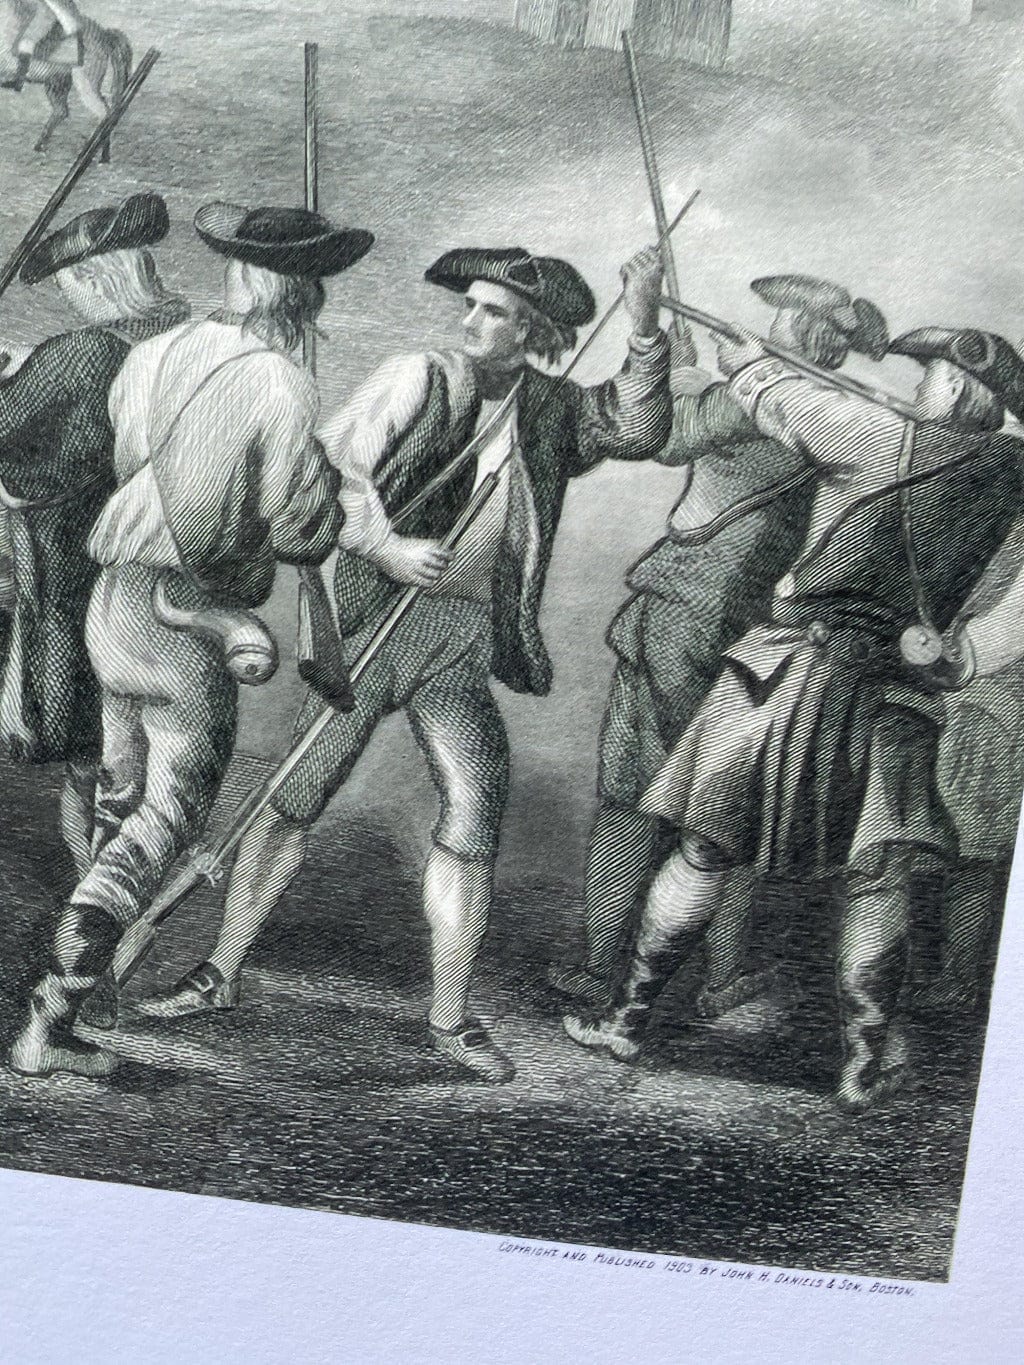 Closeup image "Battle of Lexington 1775" Archival print from the History list store